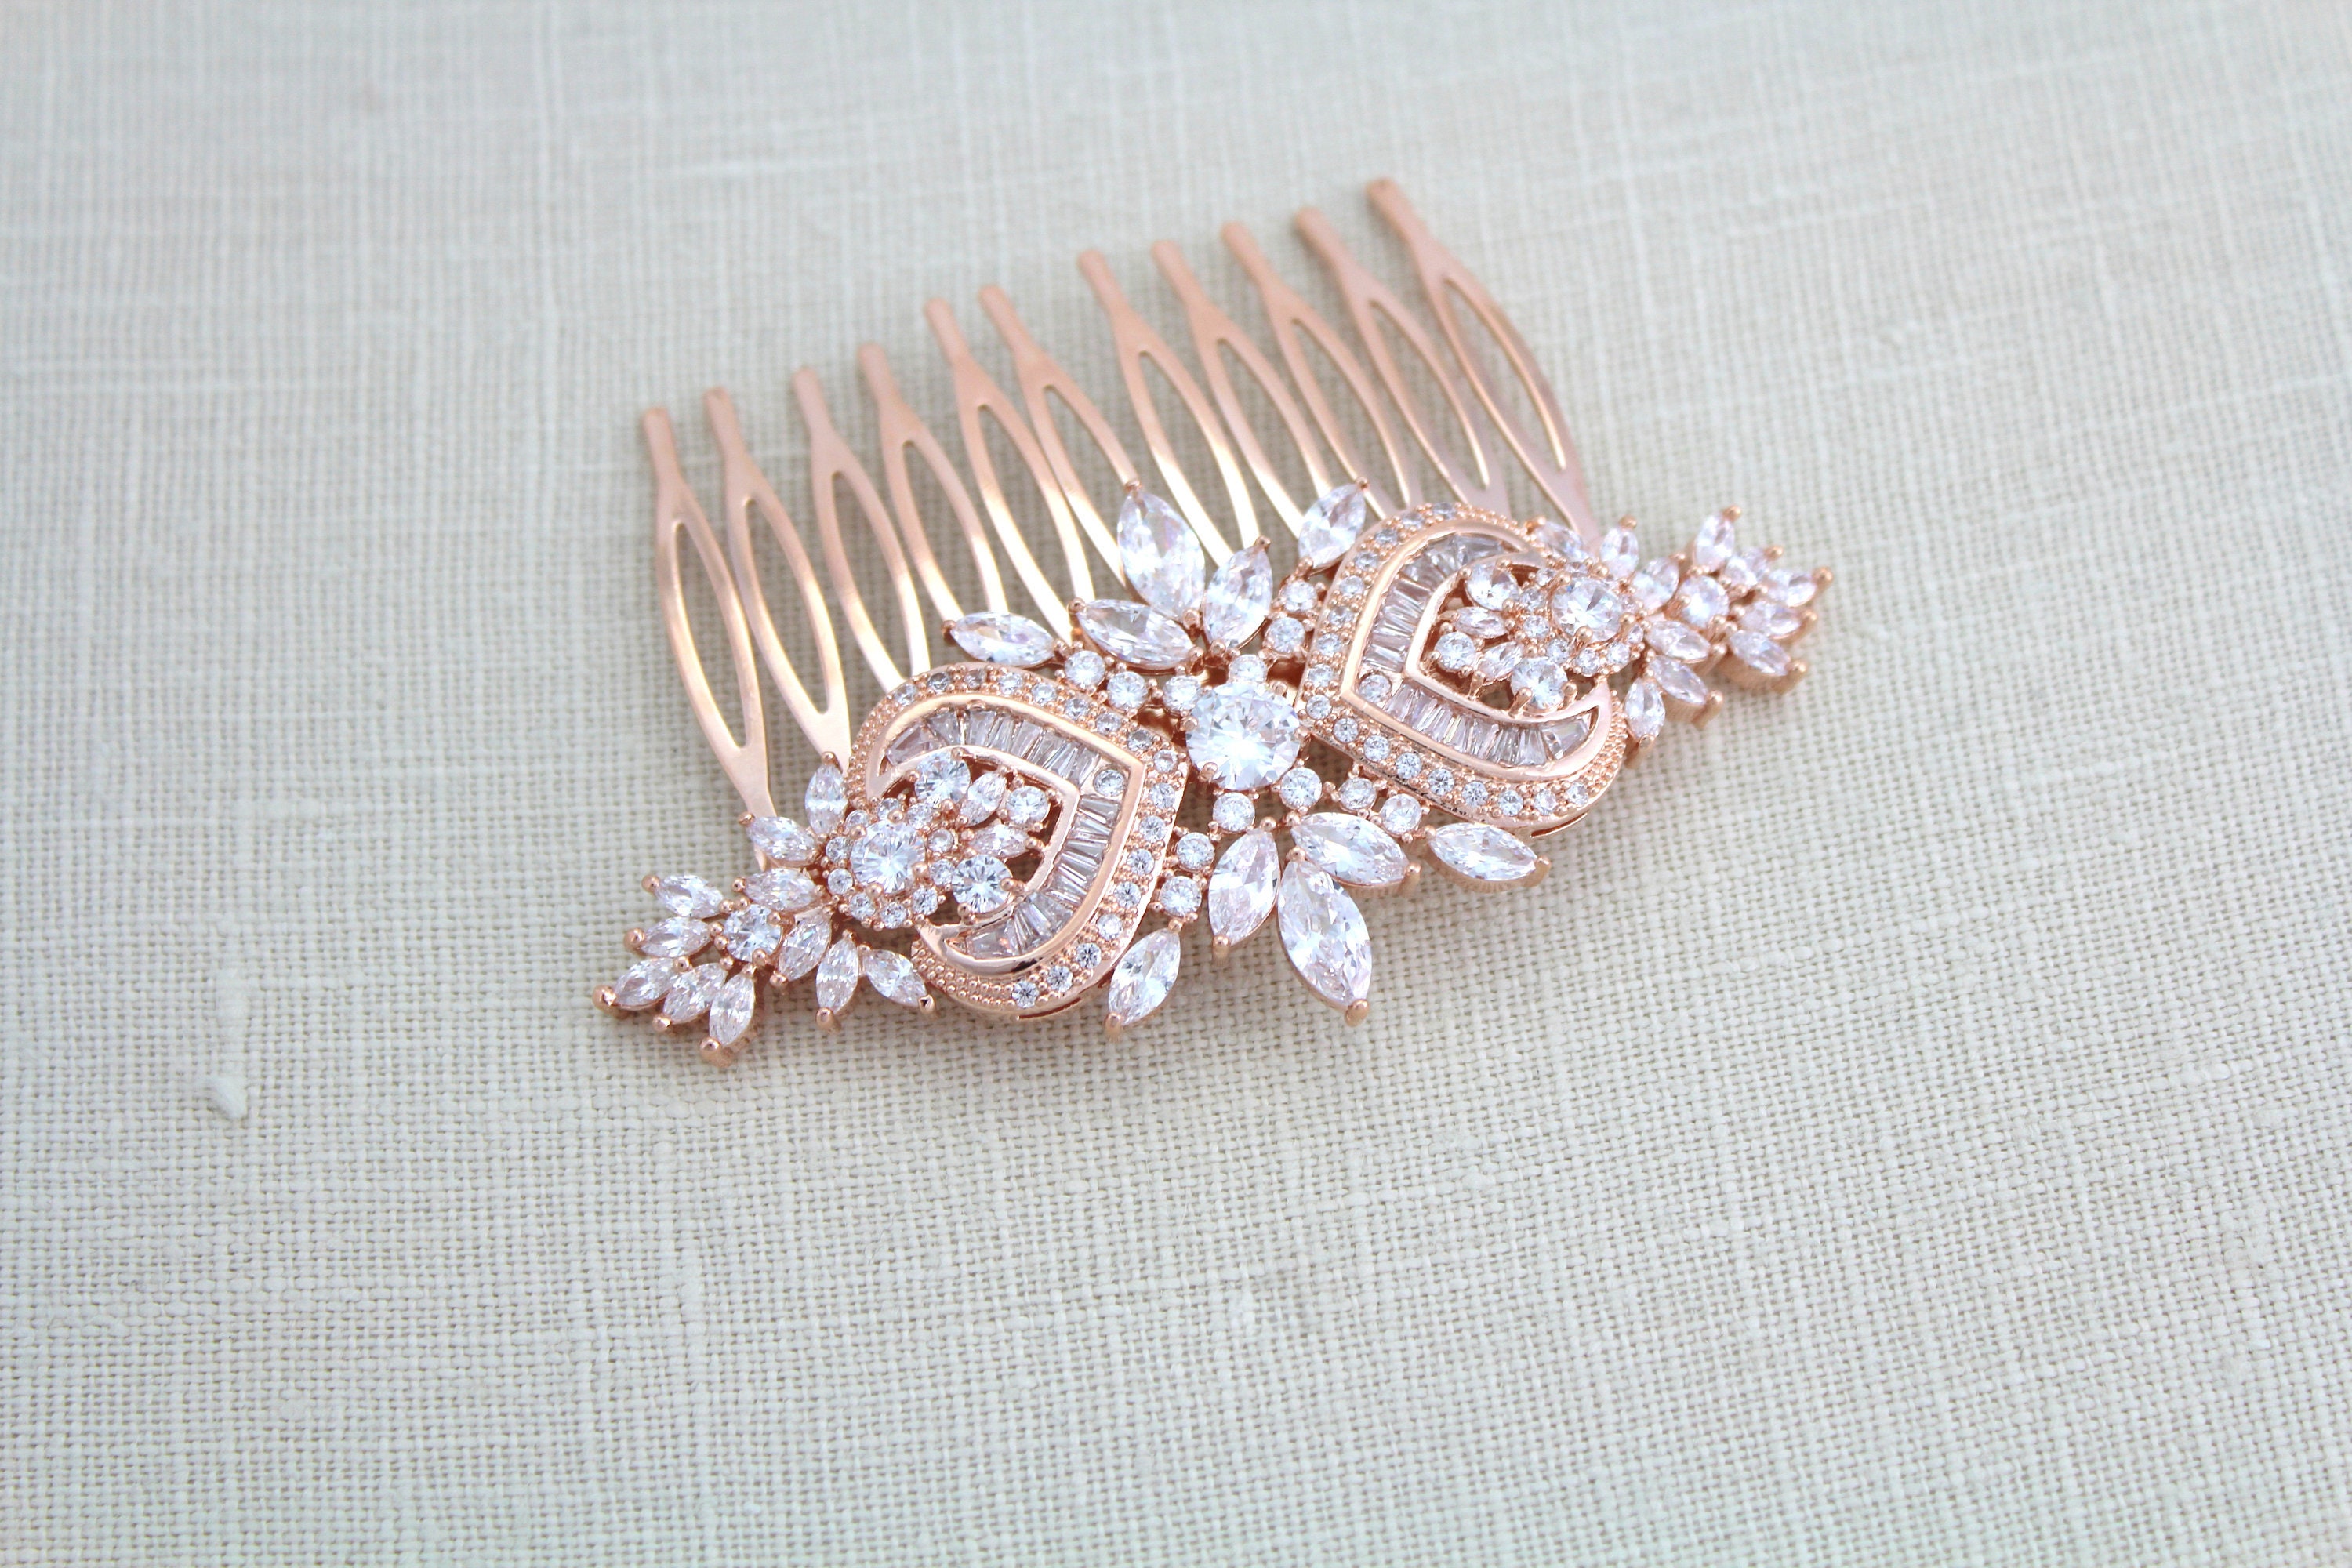 Rose Gold Hair Jewellery for Wedding Weddings Accessories Hair Accessories Decorative Combs Small Rose Gold Crystal and White Pearl Wedding Hair Comb Pearl Hair Comb Small Rose Gold Hair Comb 